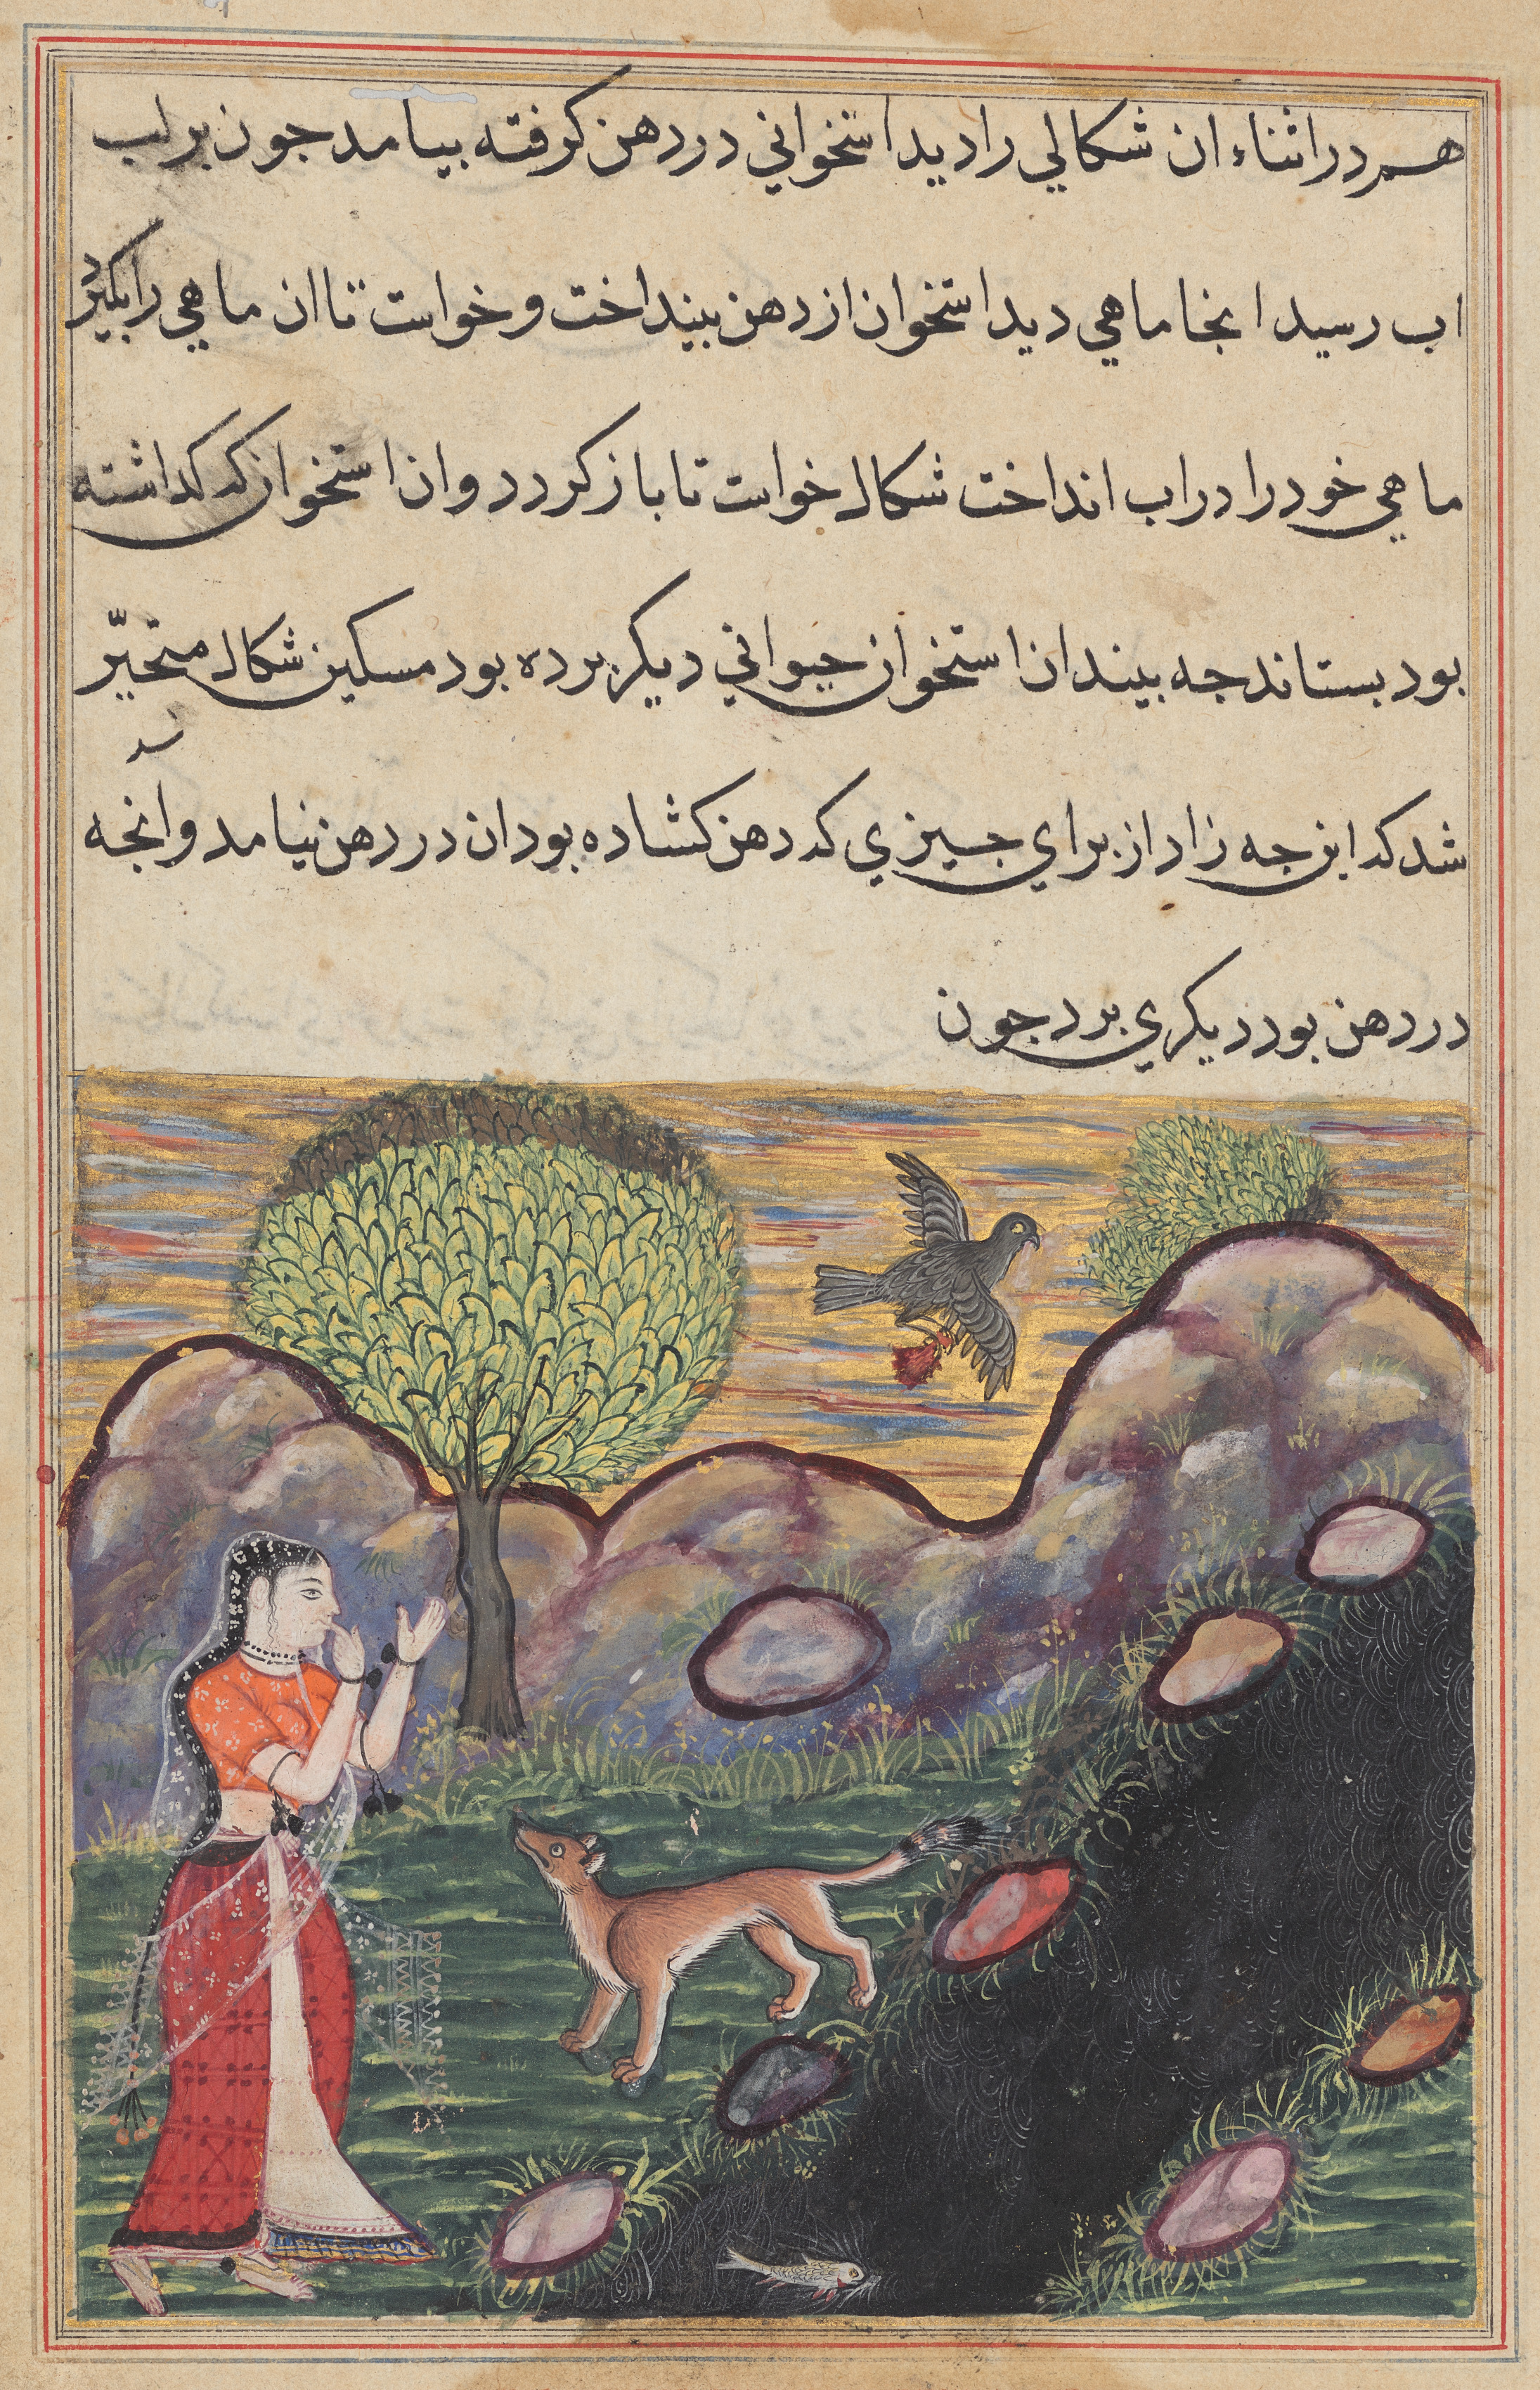 The daughter-in-law of the king of Banaras sees the jackal deprived of its food by a bird, as it unsuccessfully attempts to catch a fish, from a Tuti-nama (Tales of a Parrot): Sixteenth Night